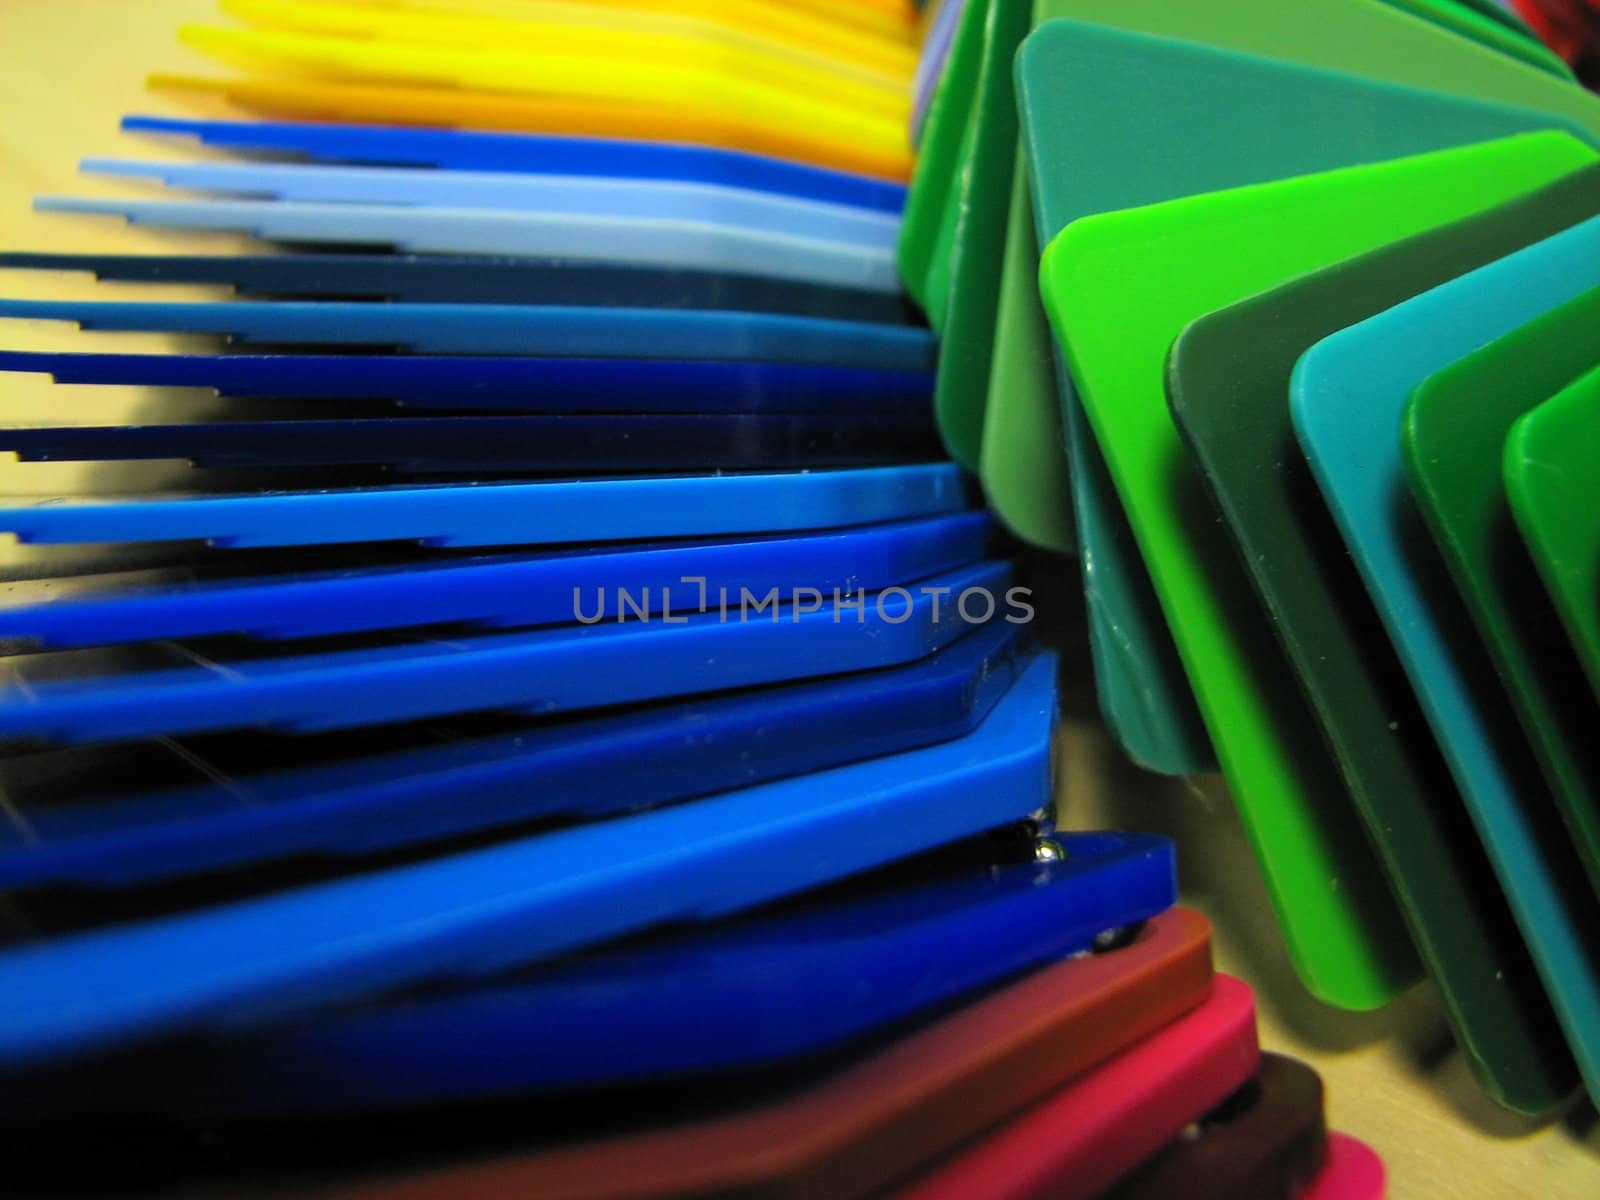 plastic color samples for color testing, blue, red, yellow